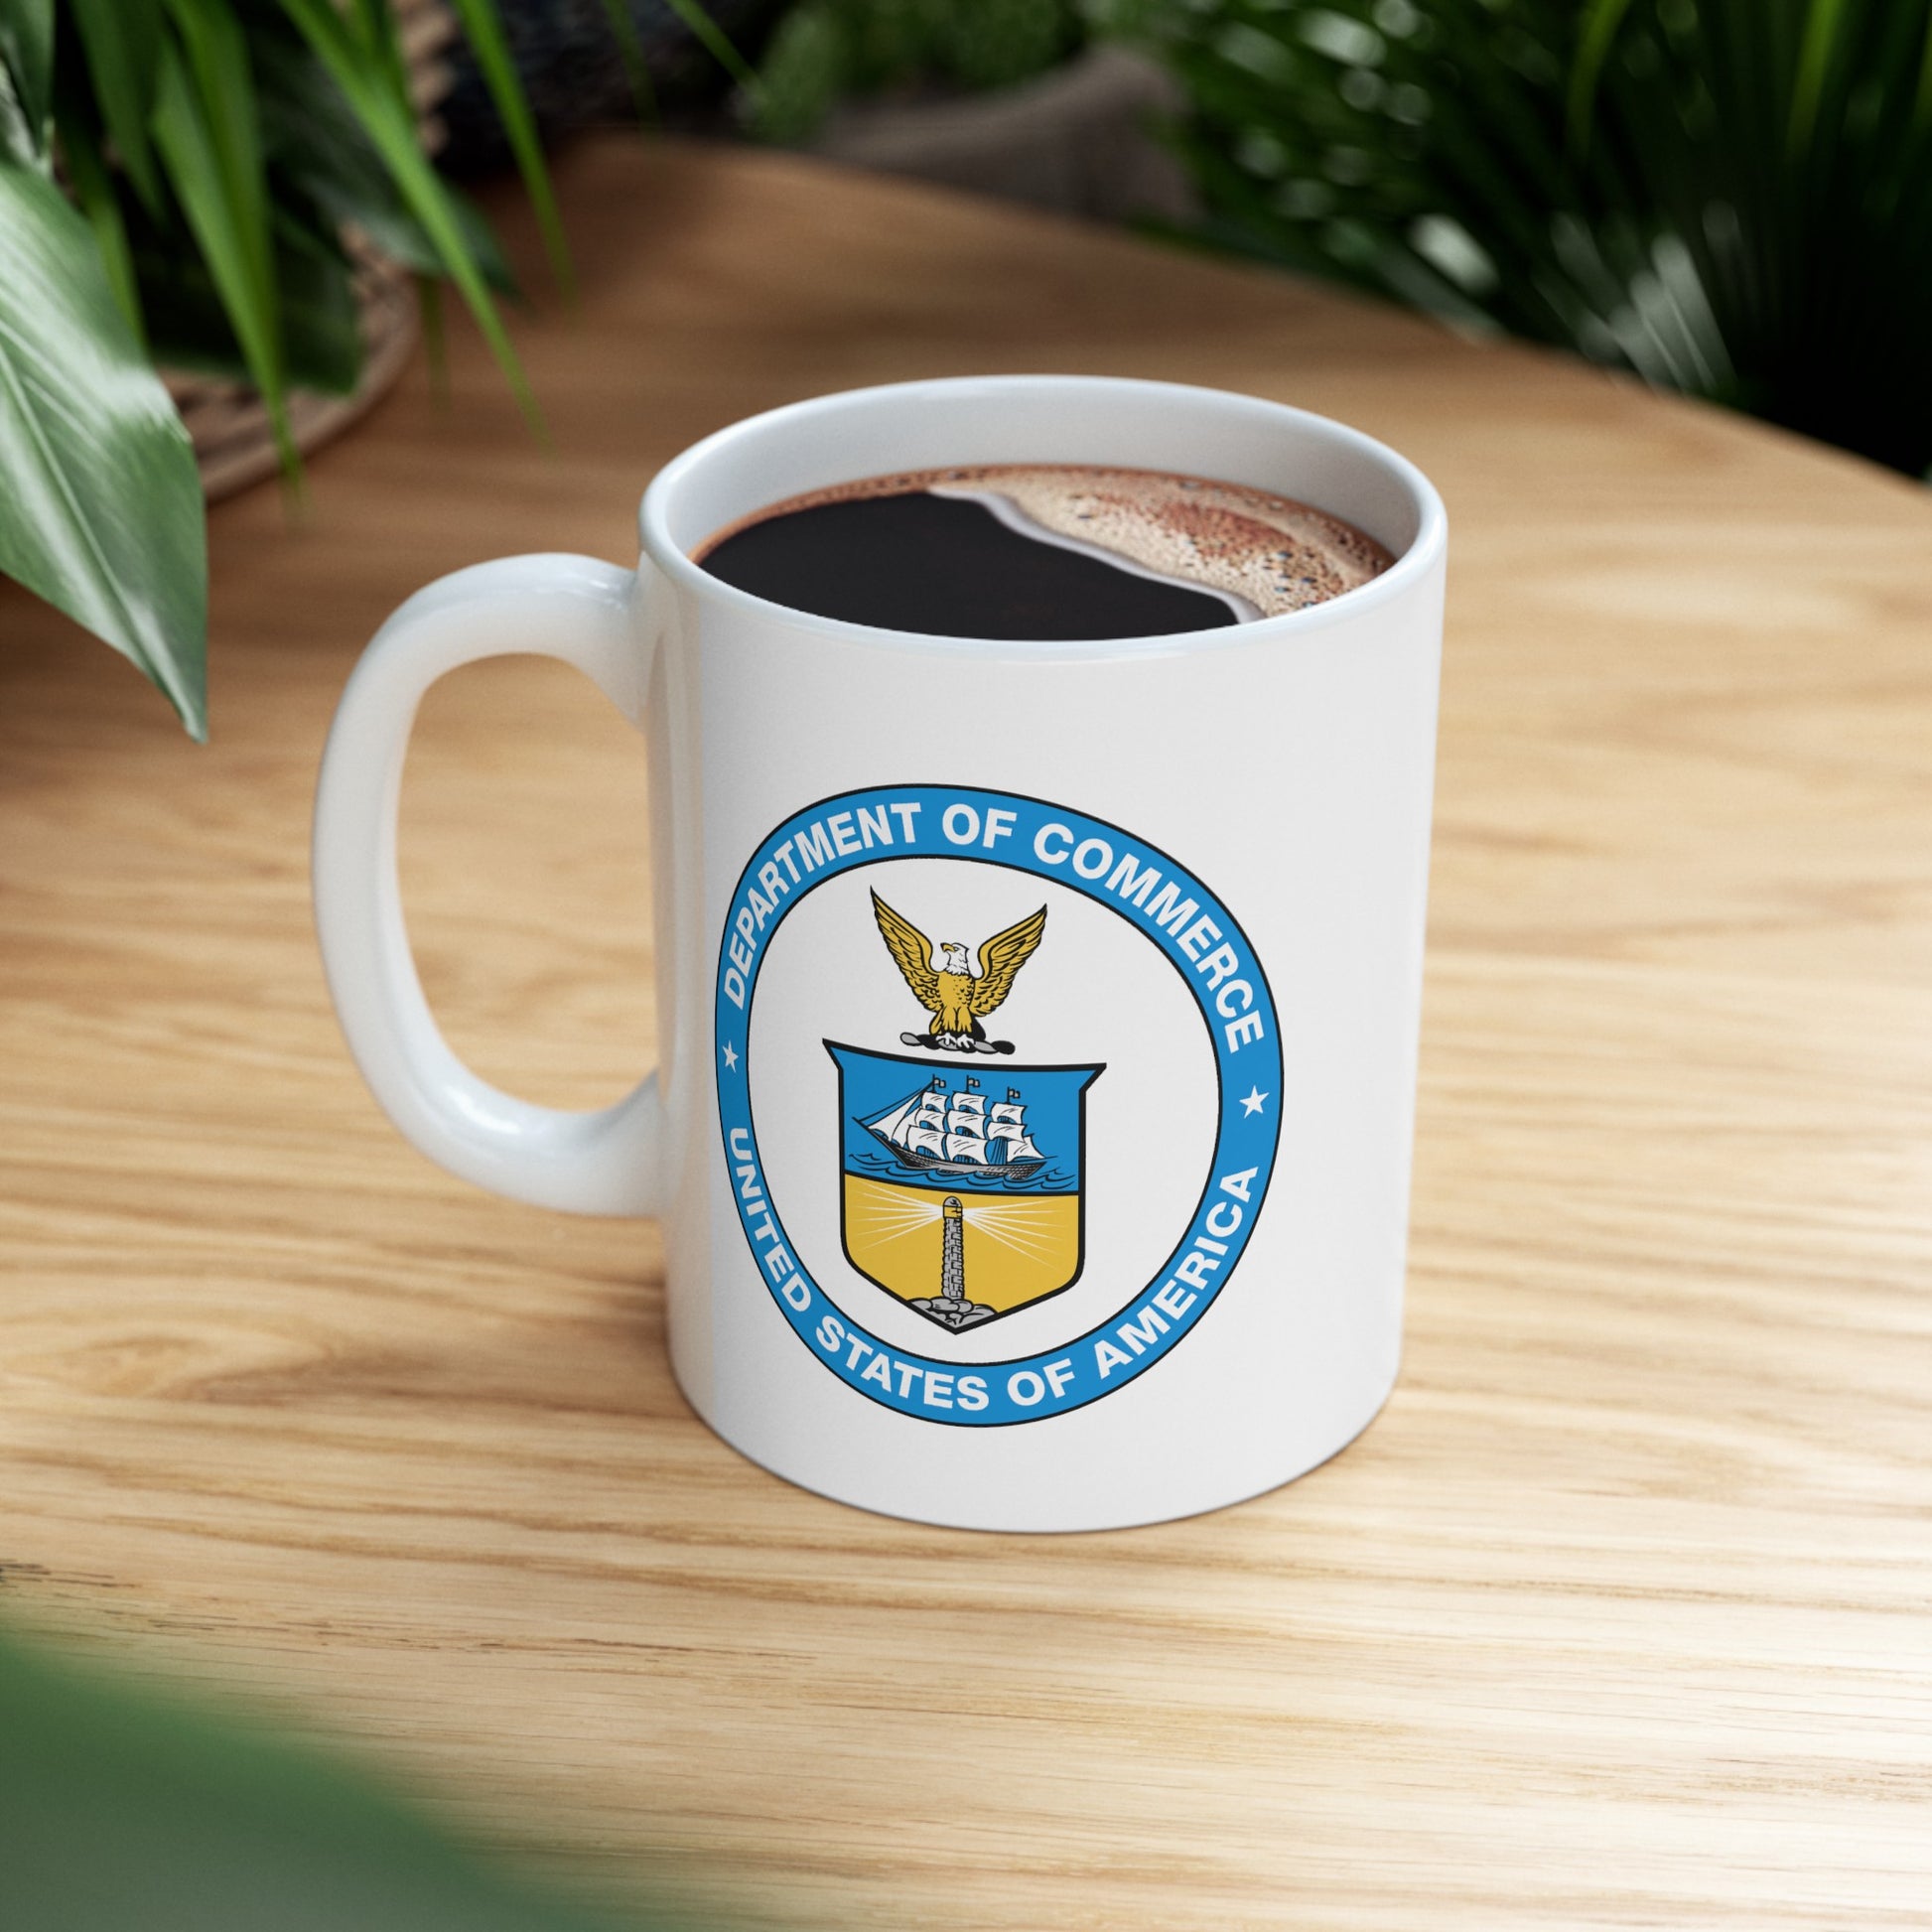 Department of Commerce Coffee Mug - Double Sided White Ceramic 11oz by TheGlassyLass.com